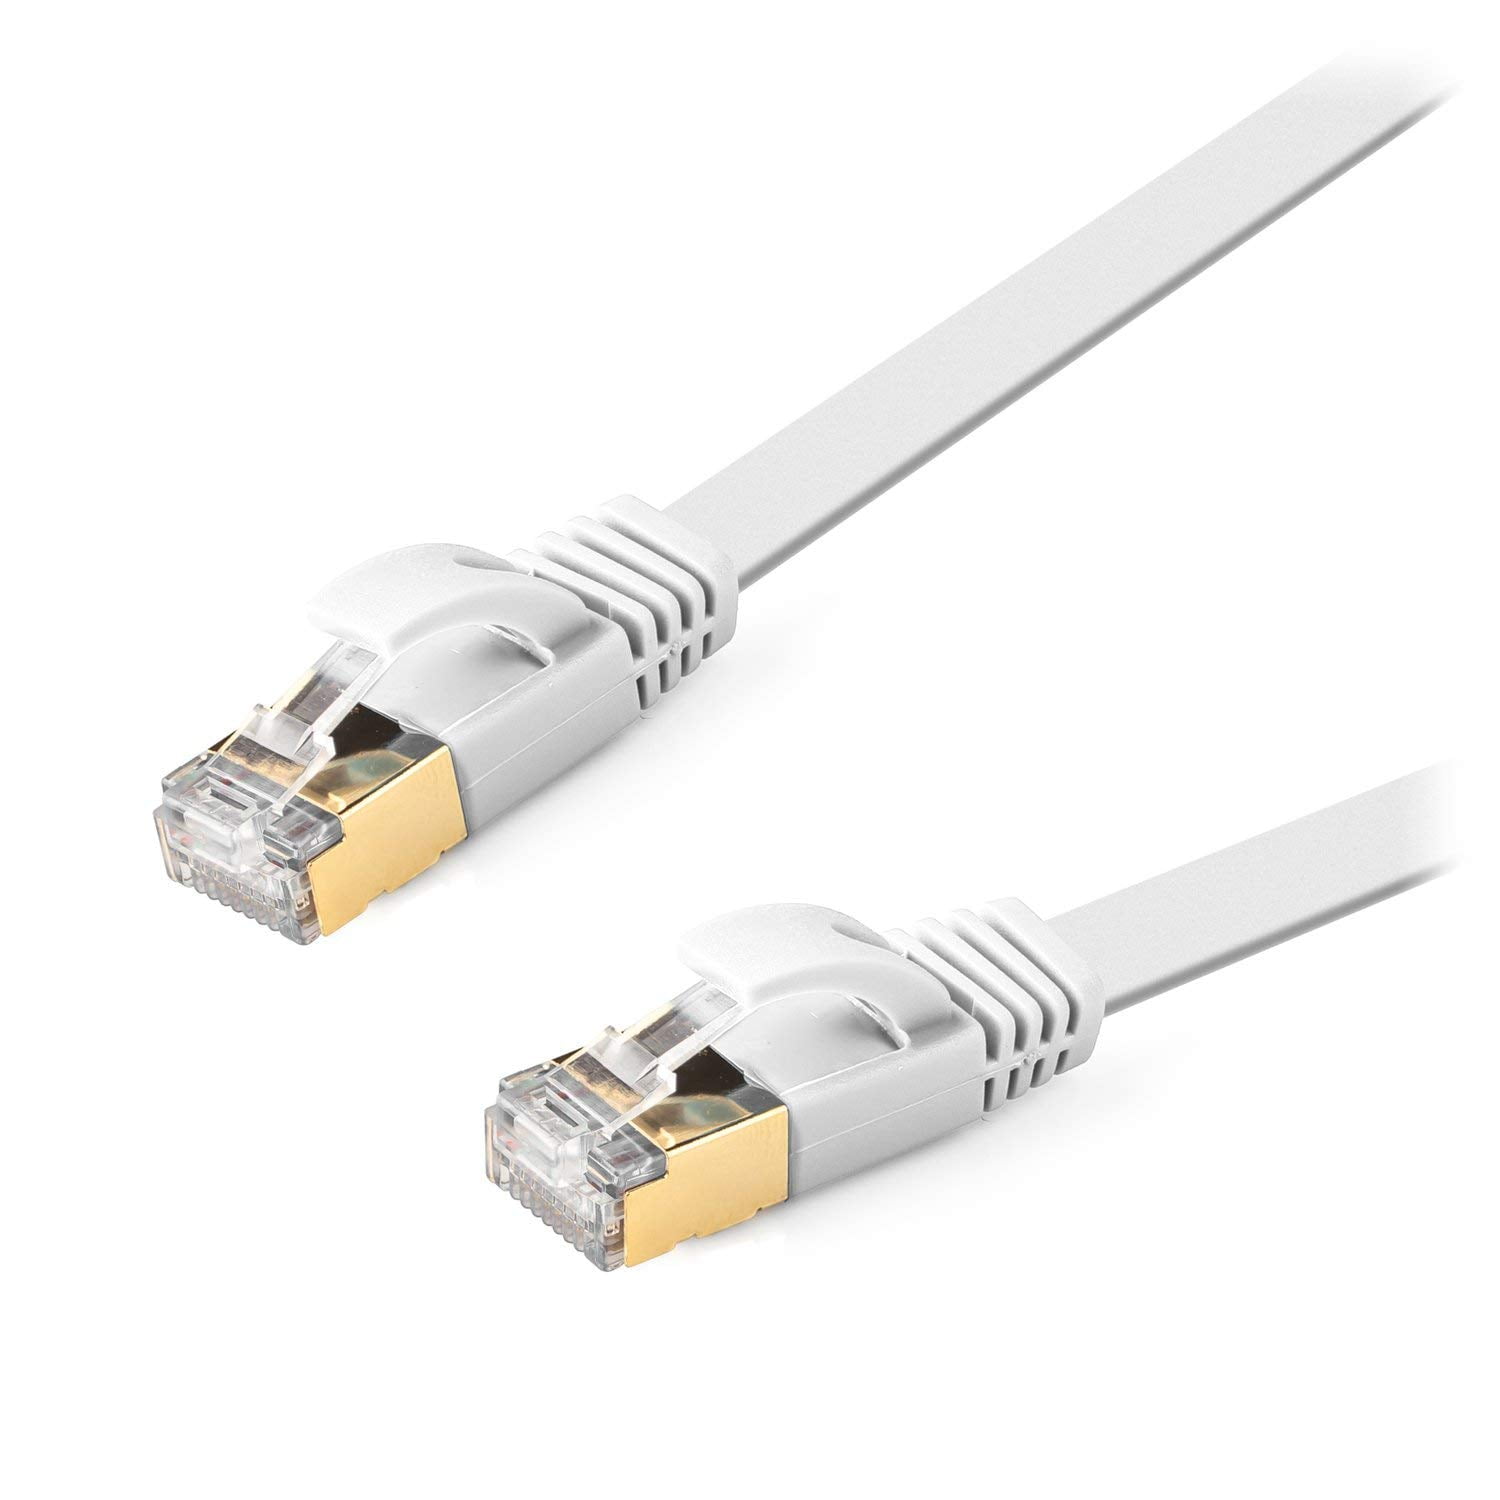 alien Optagelsesgebyr Afvige 50' FT Feet Ethernet Network Patch Cat6 Cable for Xbox \ PC \ Modem \ PS4 \  PS3 \ Router (50ft) - Flat White - Walmart.com